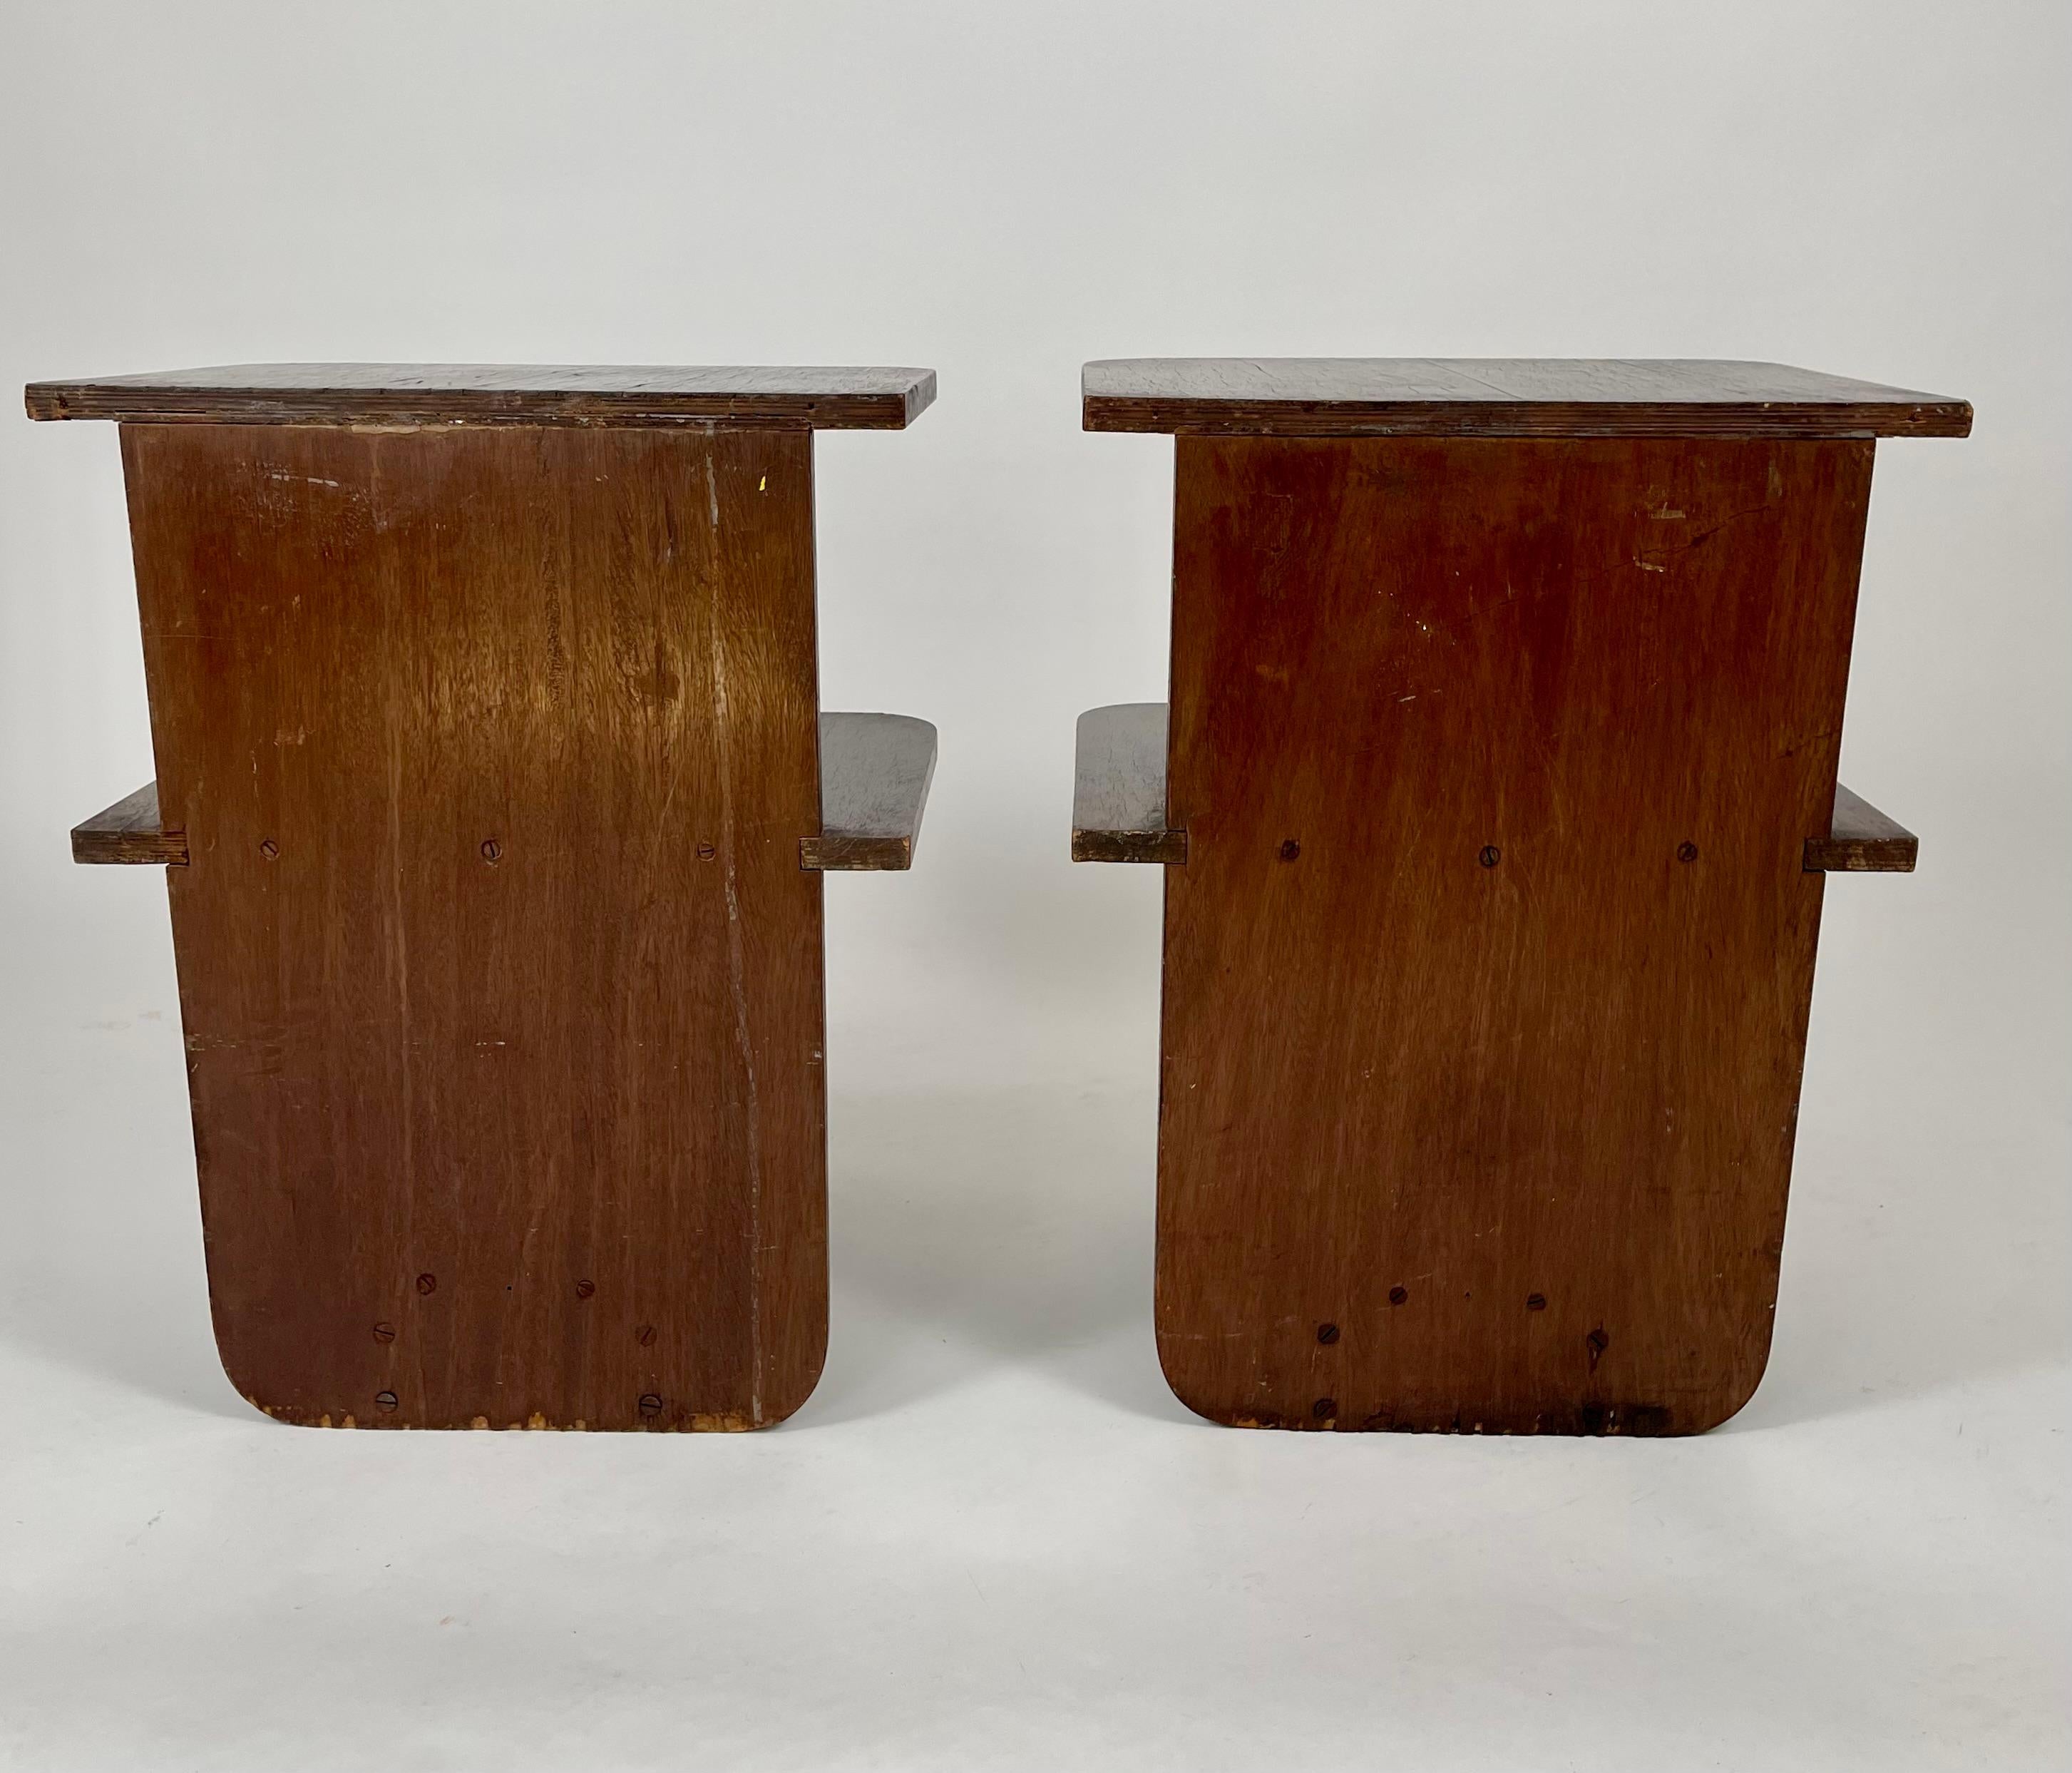 Hardwood Pair of Small Art Deco End Tables with Shelves